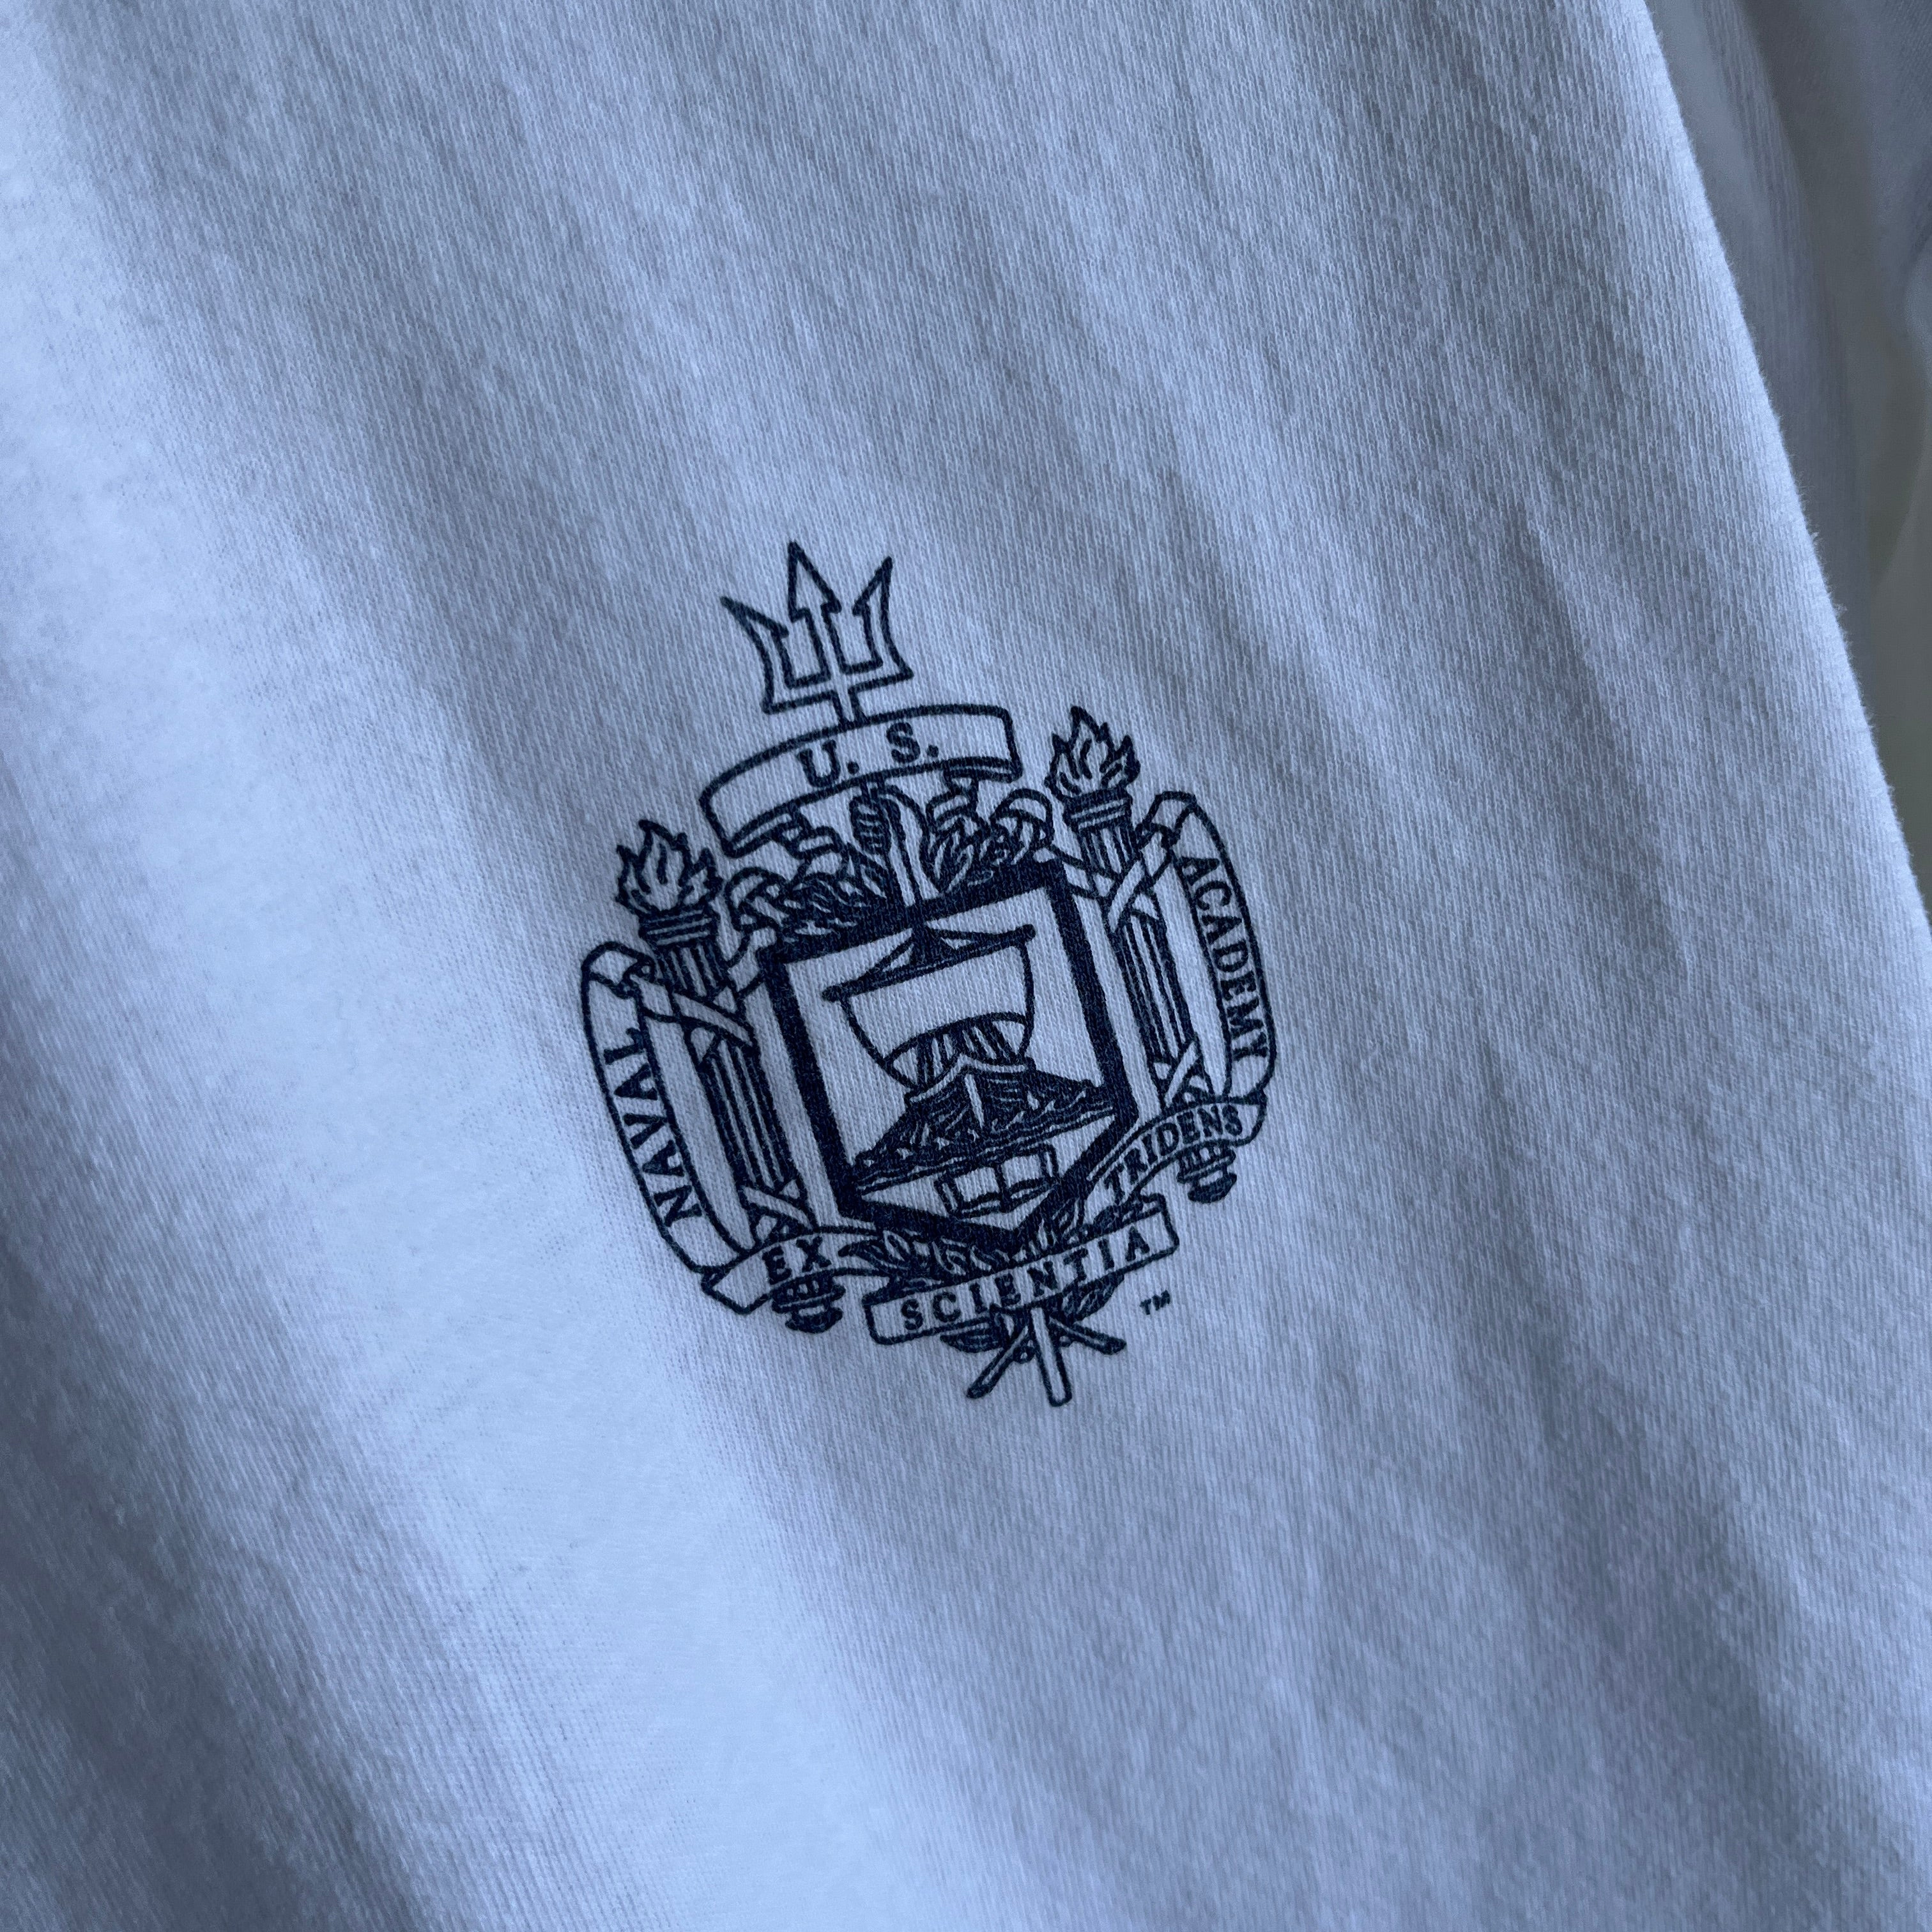 1980/90s US Naval Academy Cotton Ring T-Shirt